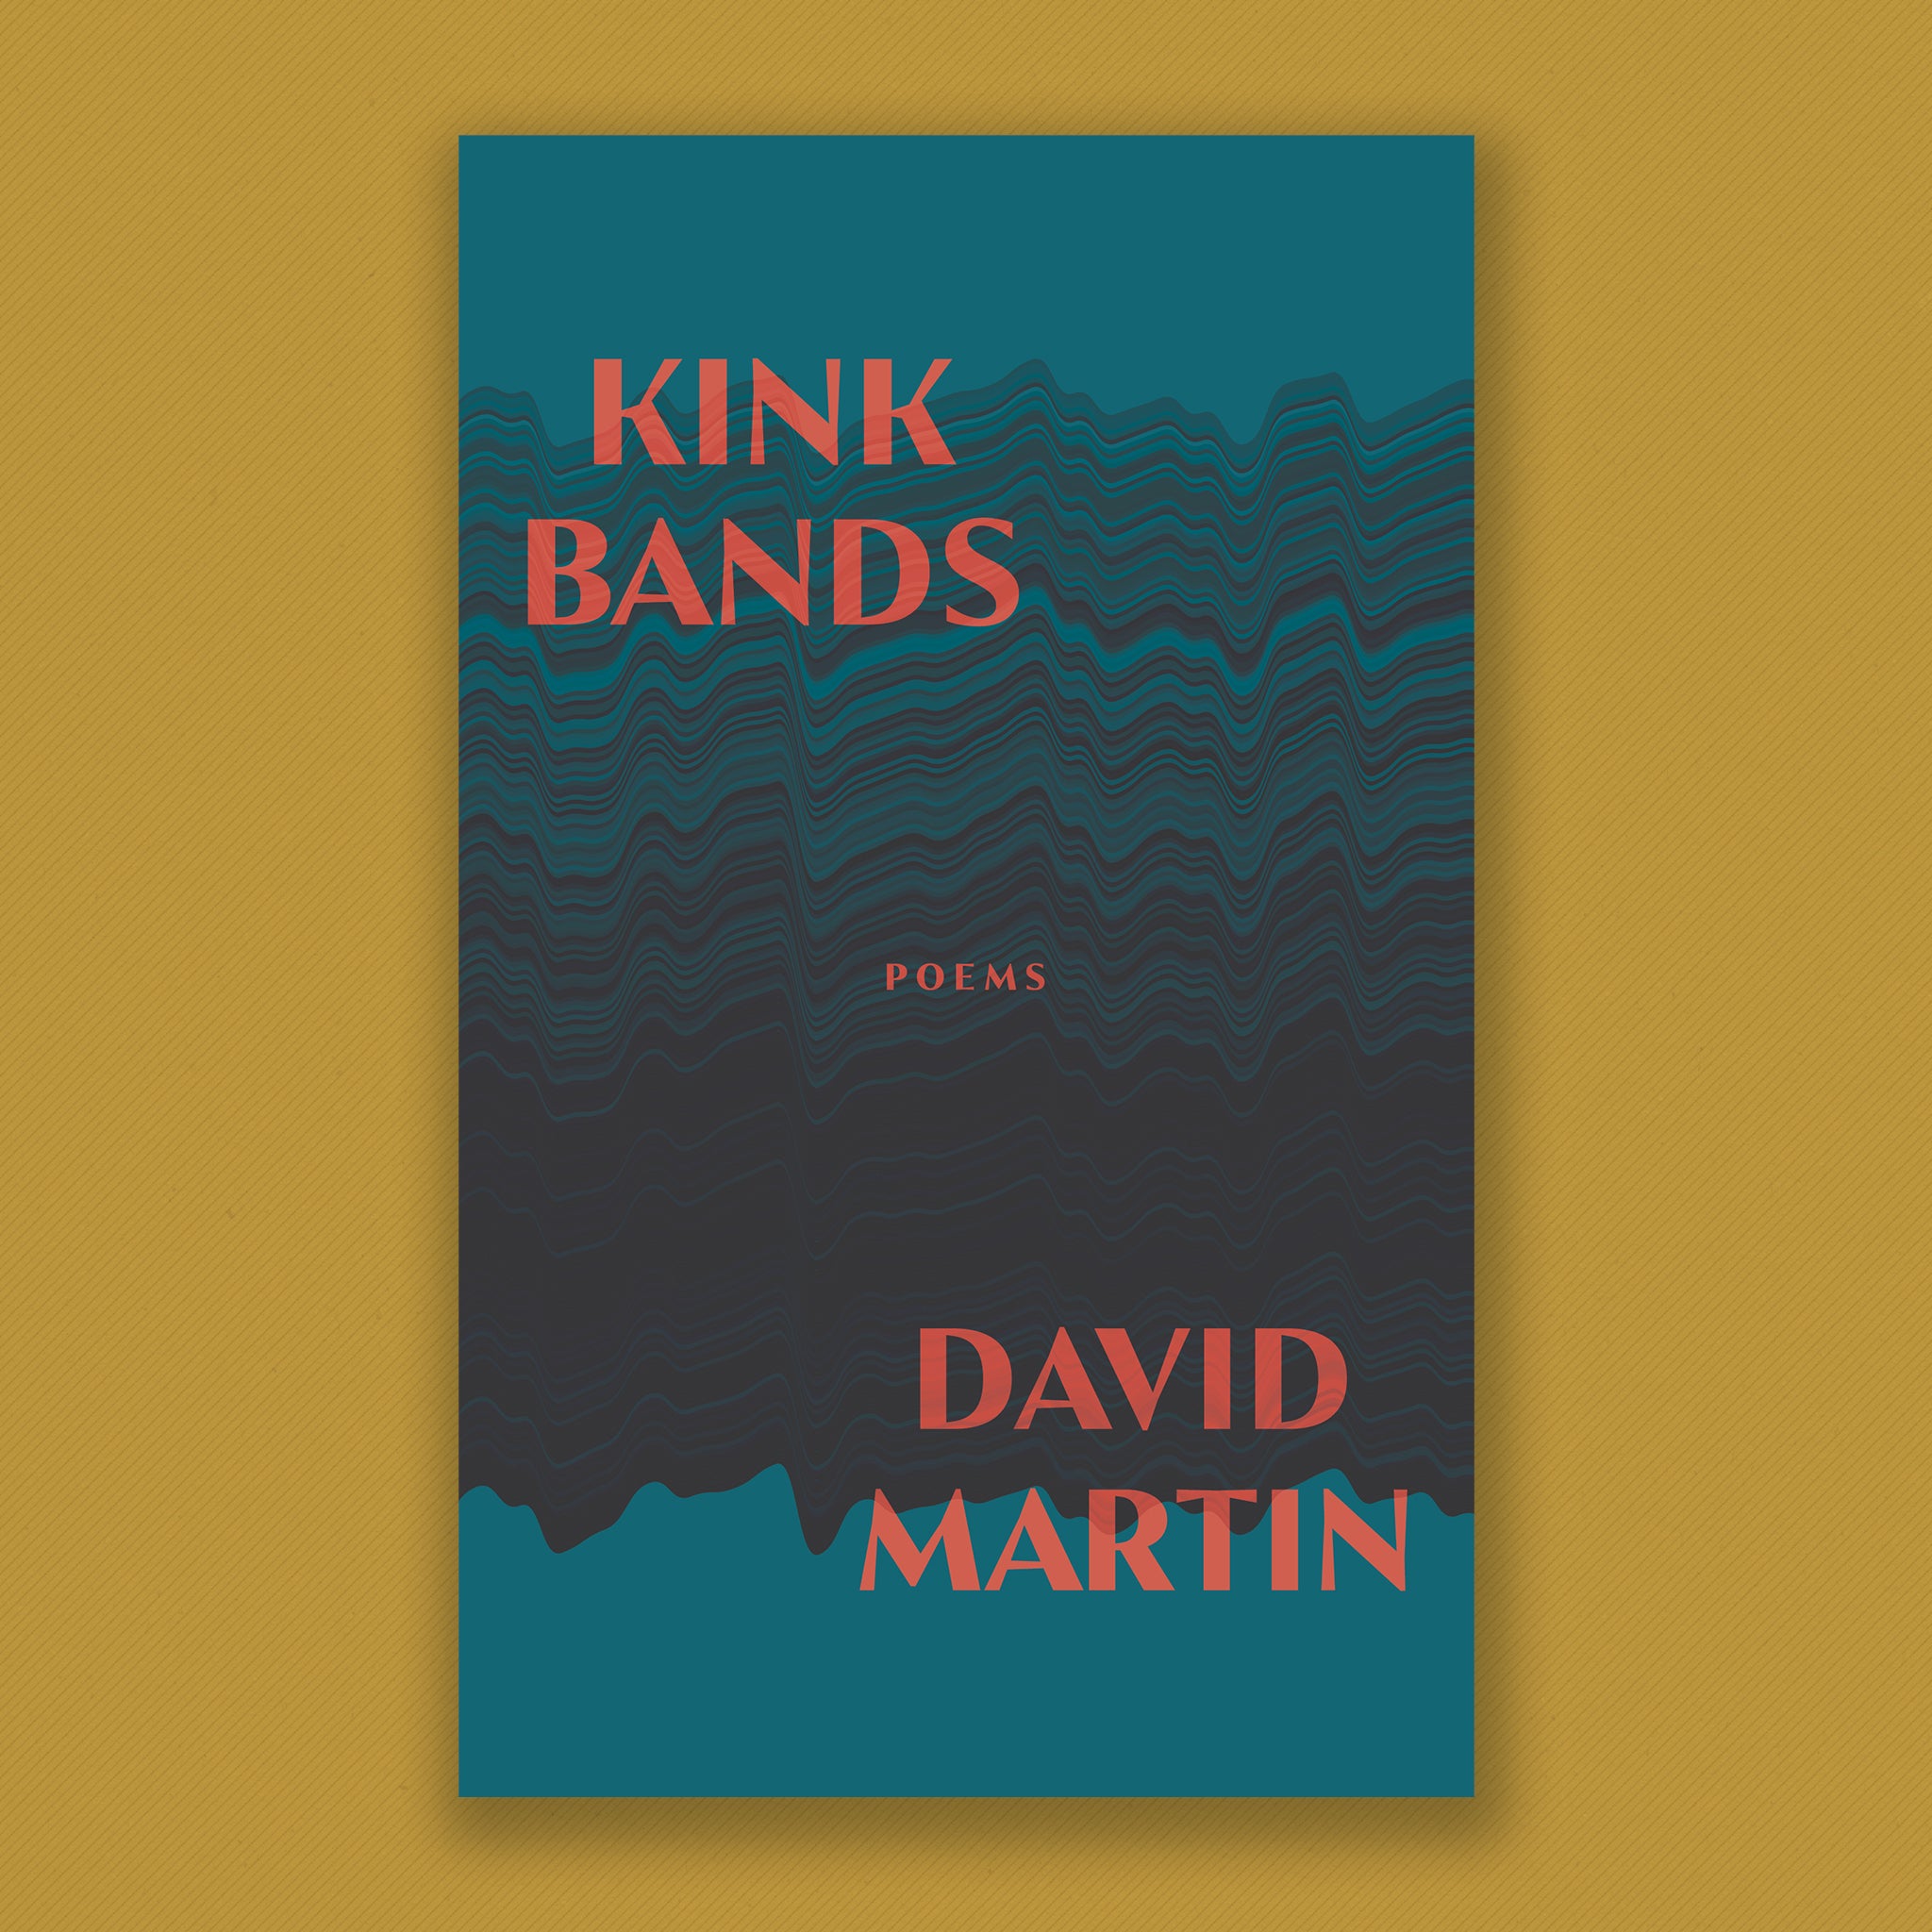 A cool-toned teal background shows darker abstract images of the kink band rock formation (a formation of tabular fold zones wherein a layer of rock is folded in upon itself to create a “Z” like impression) and the title and poet’s name in bold sunset orange. Full text reads: Kink Bands. Poems. David Martin.